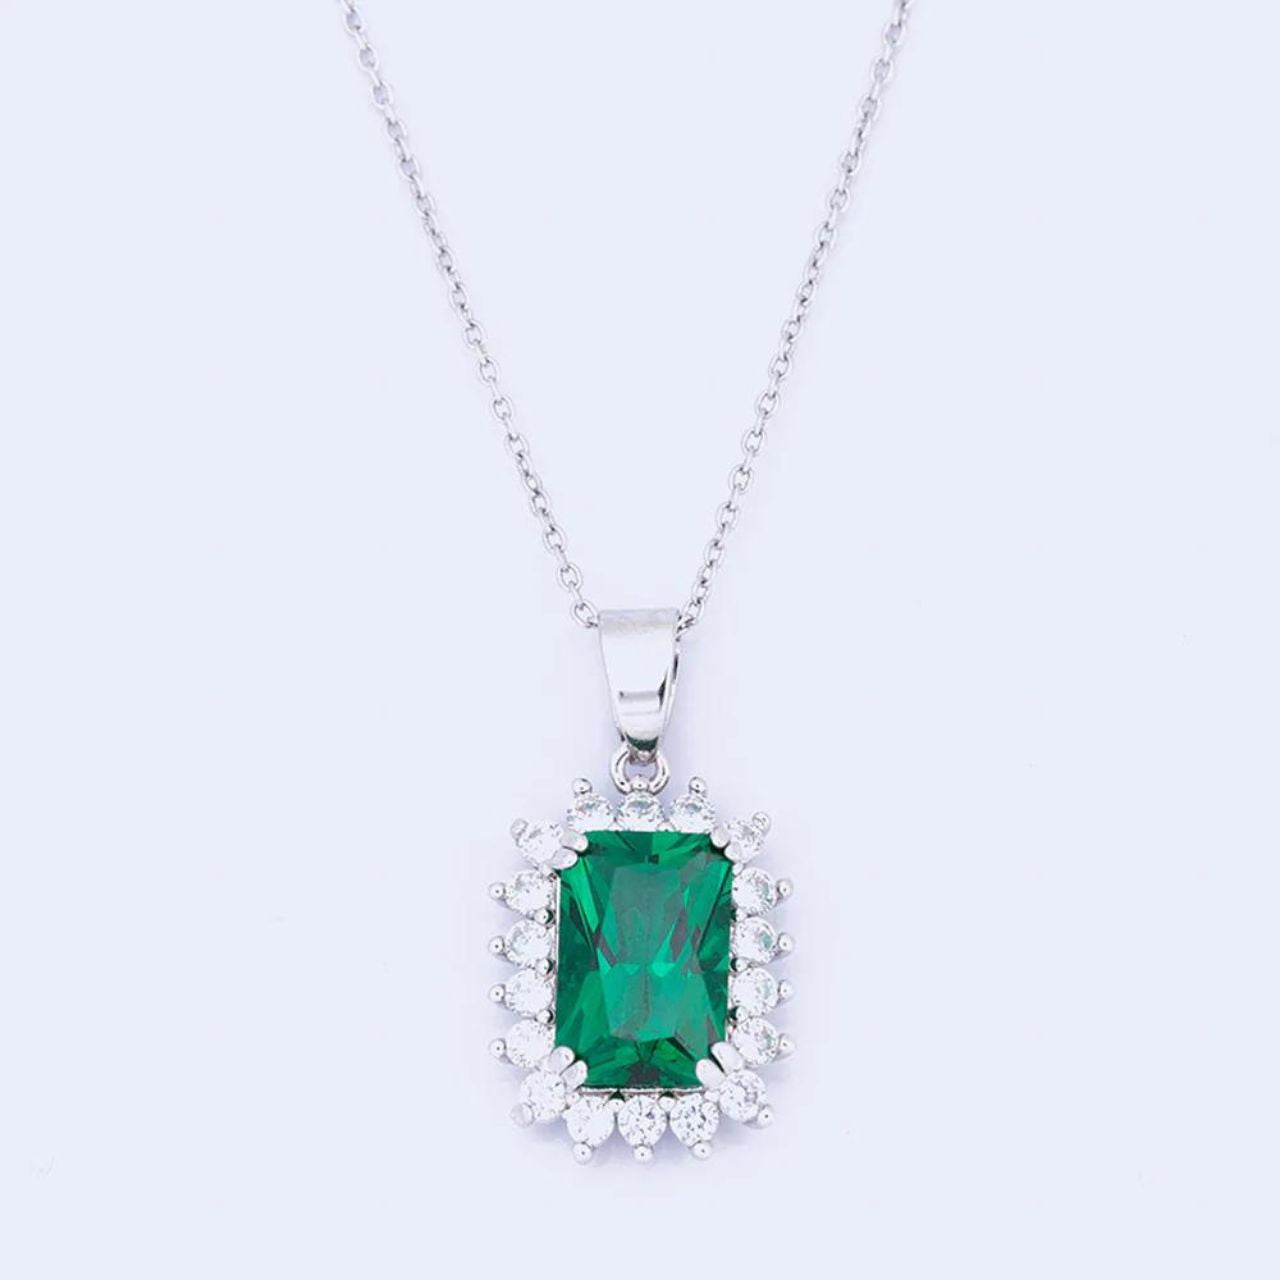 Knight & Day Classic Emerald Pendant  Classic style pendant with beautiful emerald CZ centre stone. Rhodium plating.  Length 42 + 5cm extension.